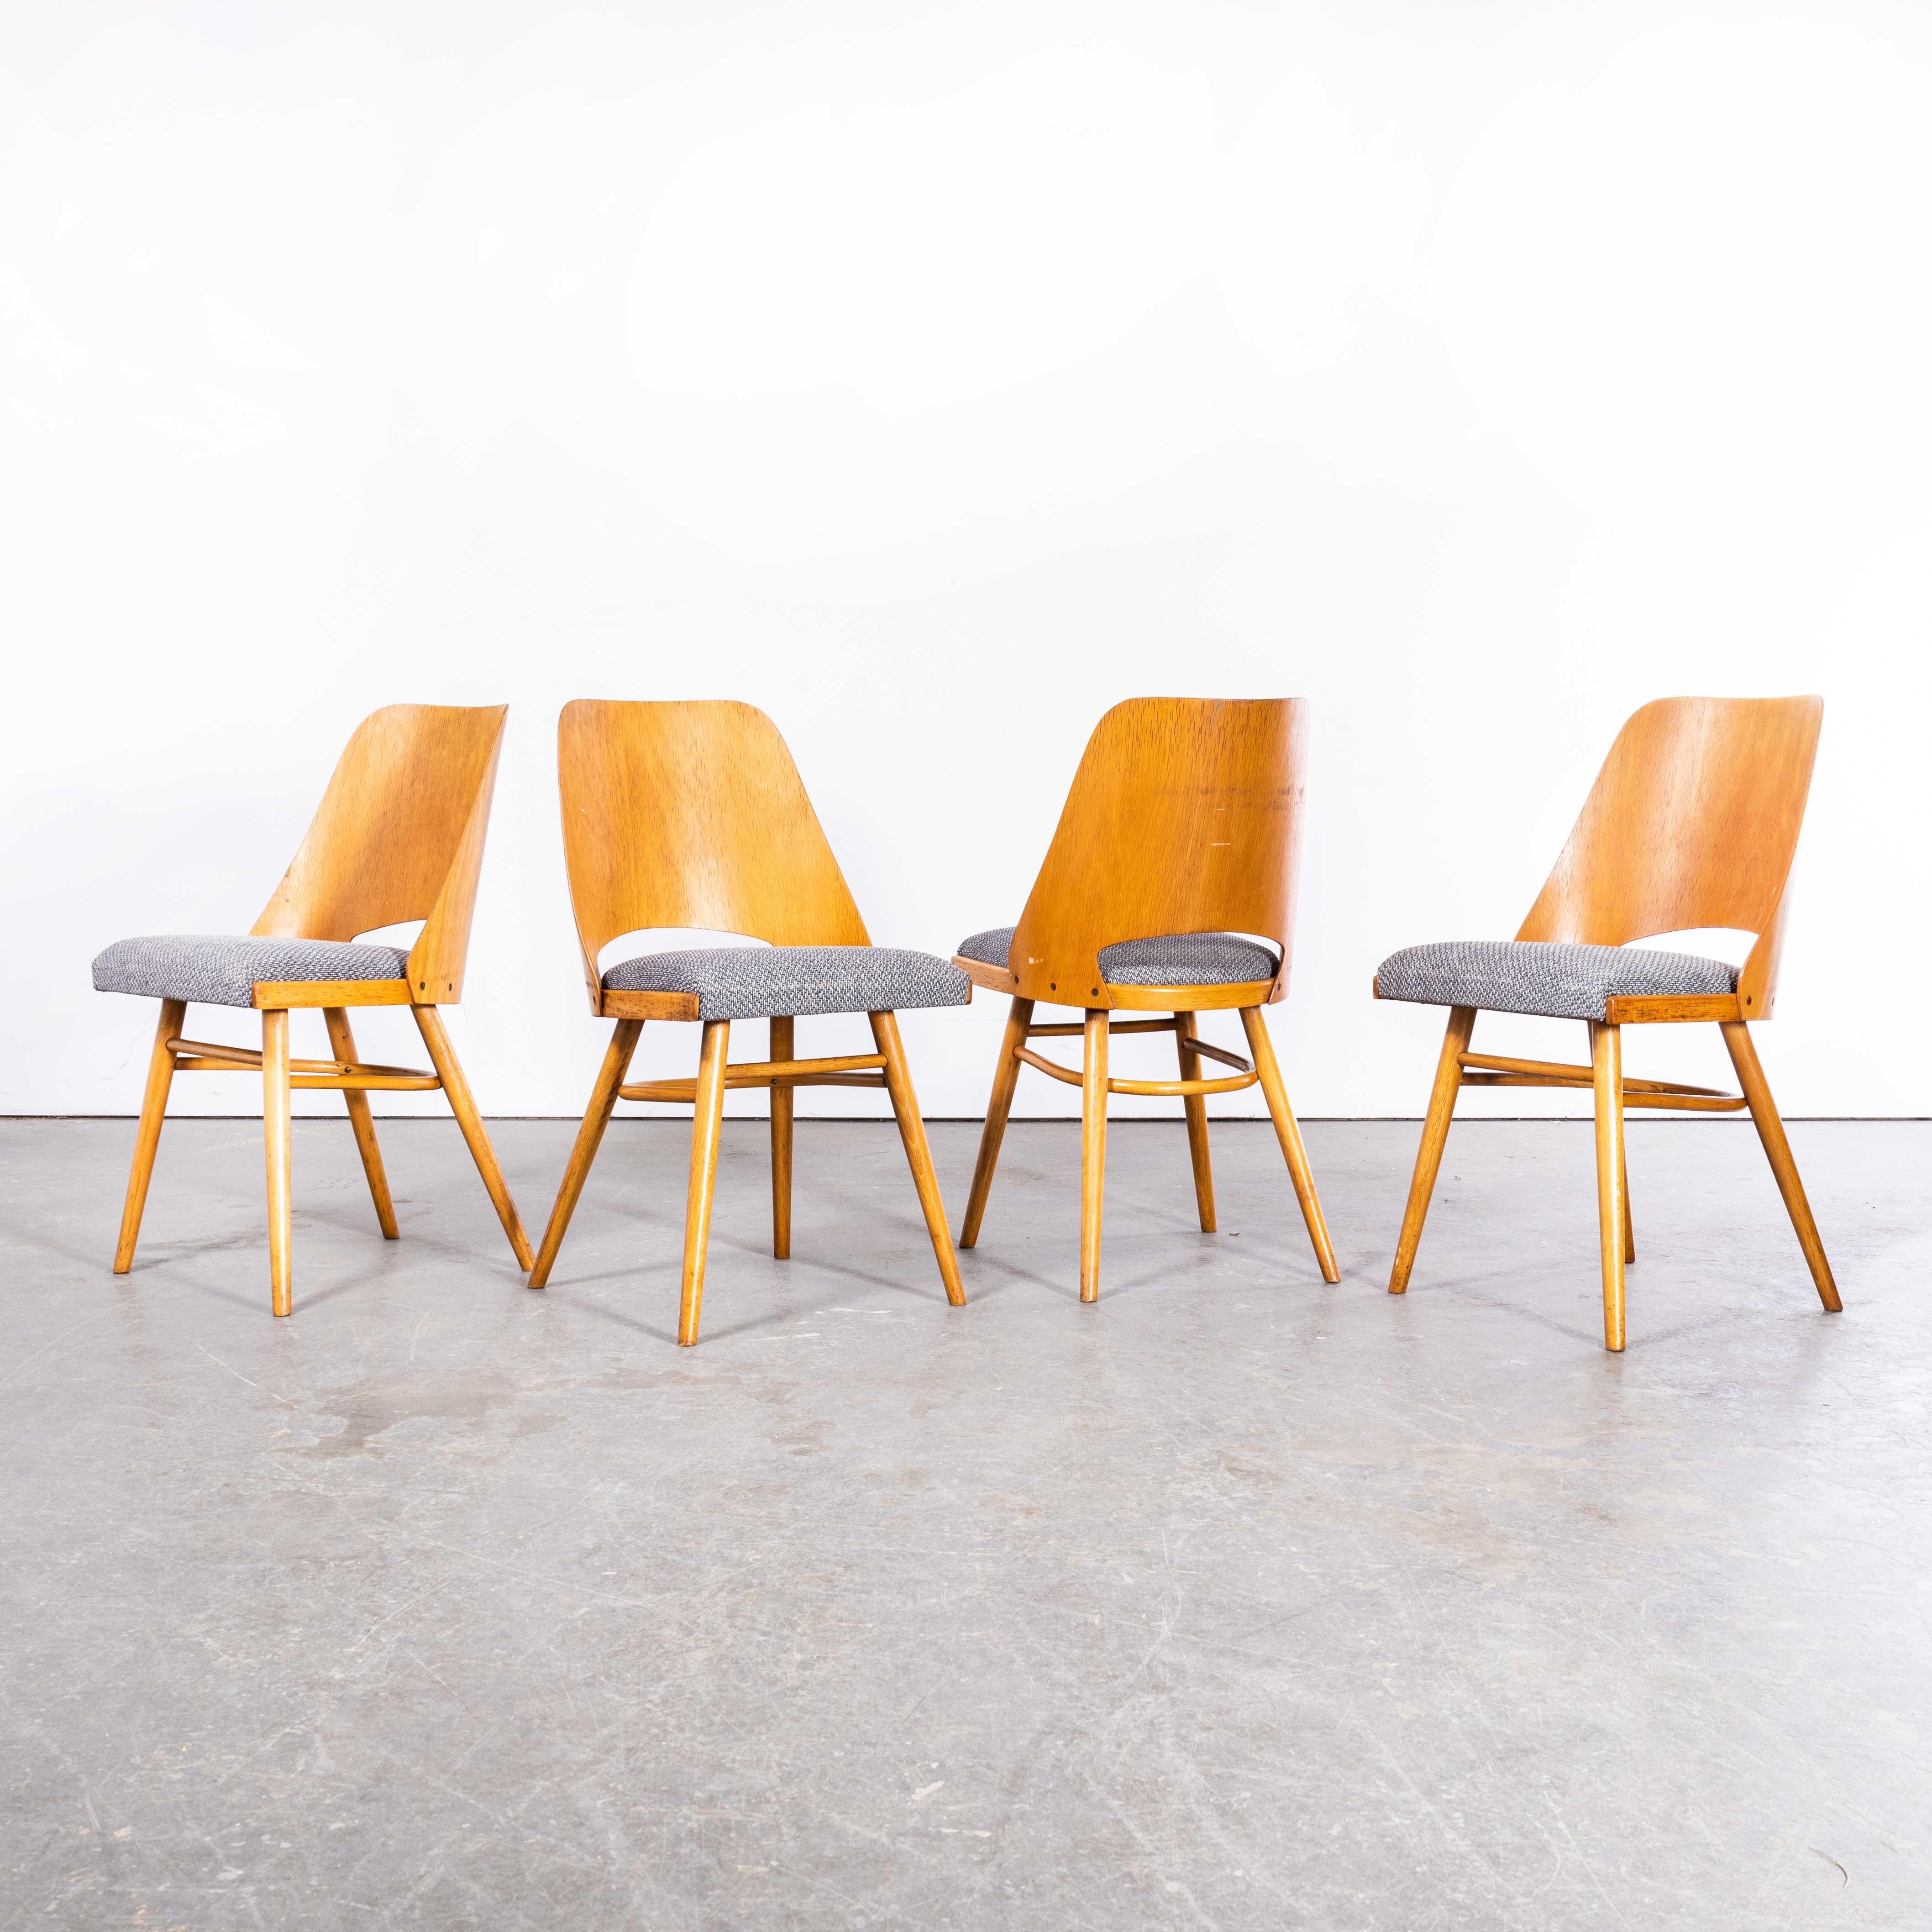 1950s Upholstered Ton Dining Chairs By Radomir Hoffman – Set Of Four
1950s Upholstered Ton Dining Chairs By Radomir Hoffman – Set Of Four. These chairs were produced by the famous Czech firm Ton, still trading today and producing beautiful chairs,